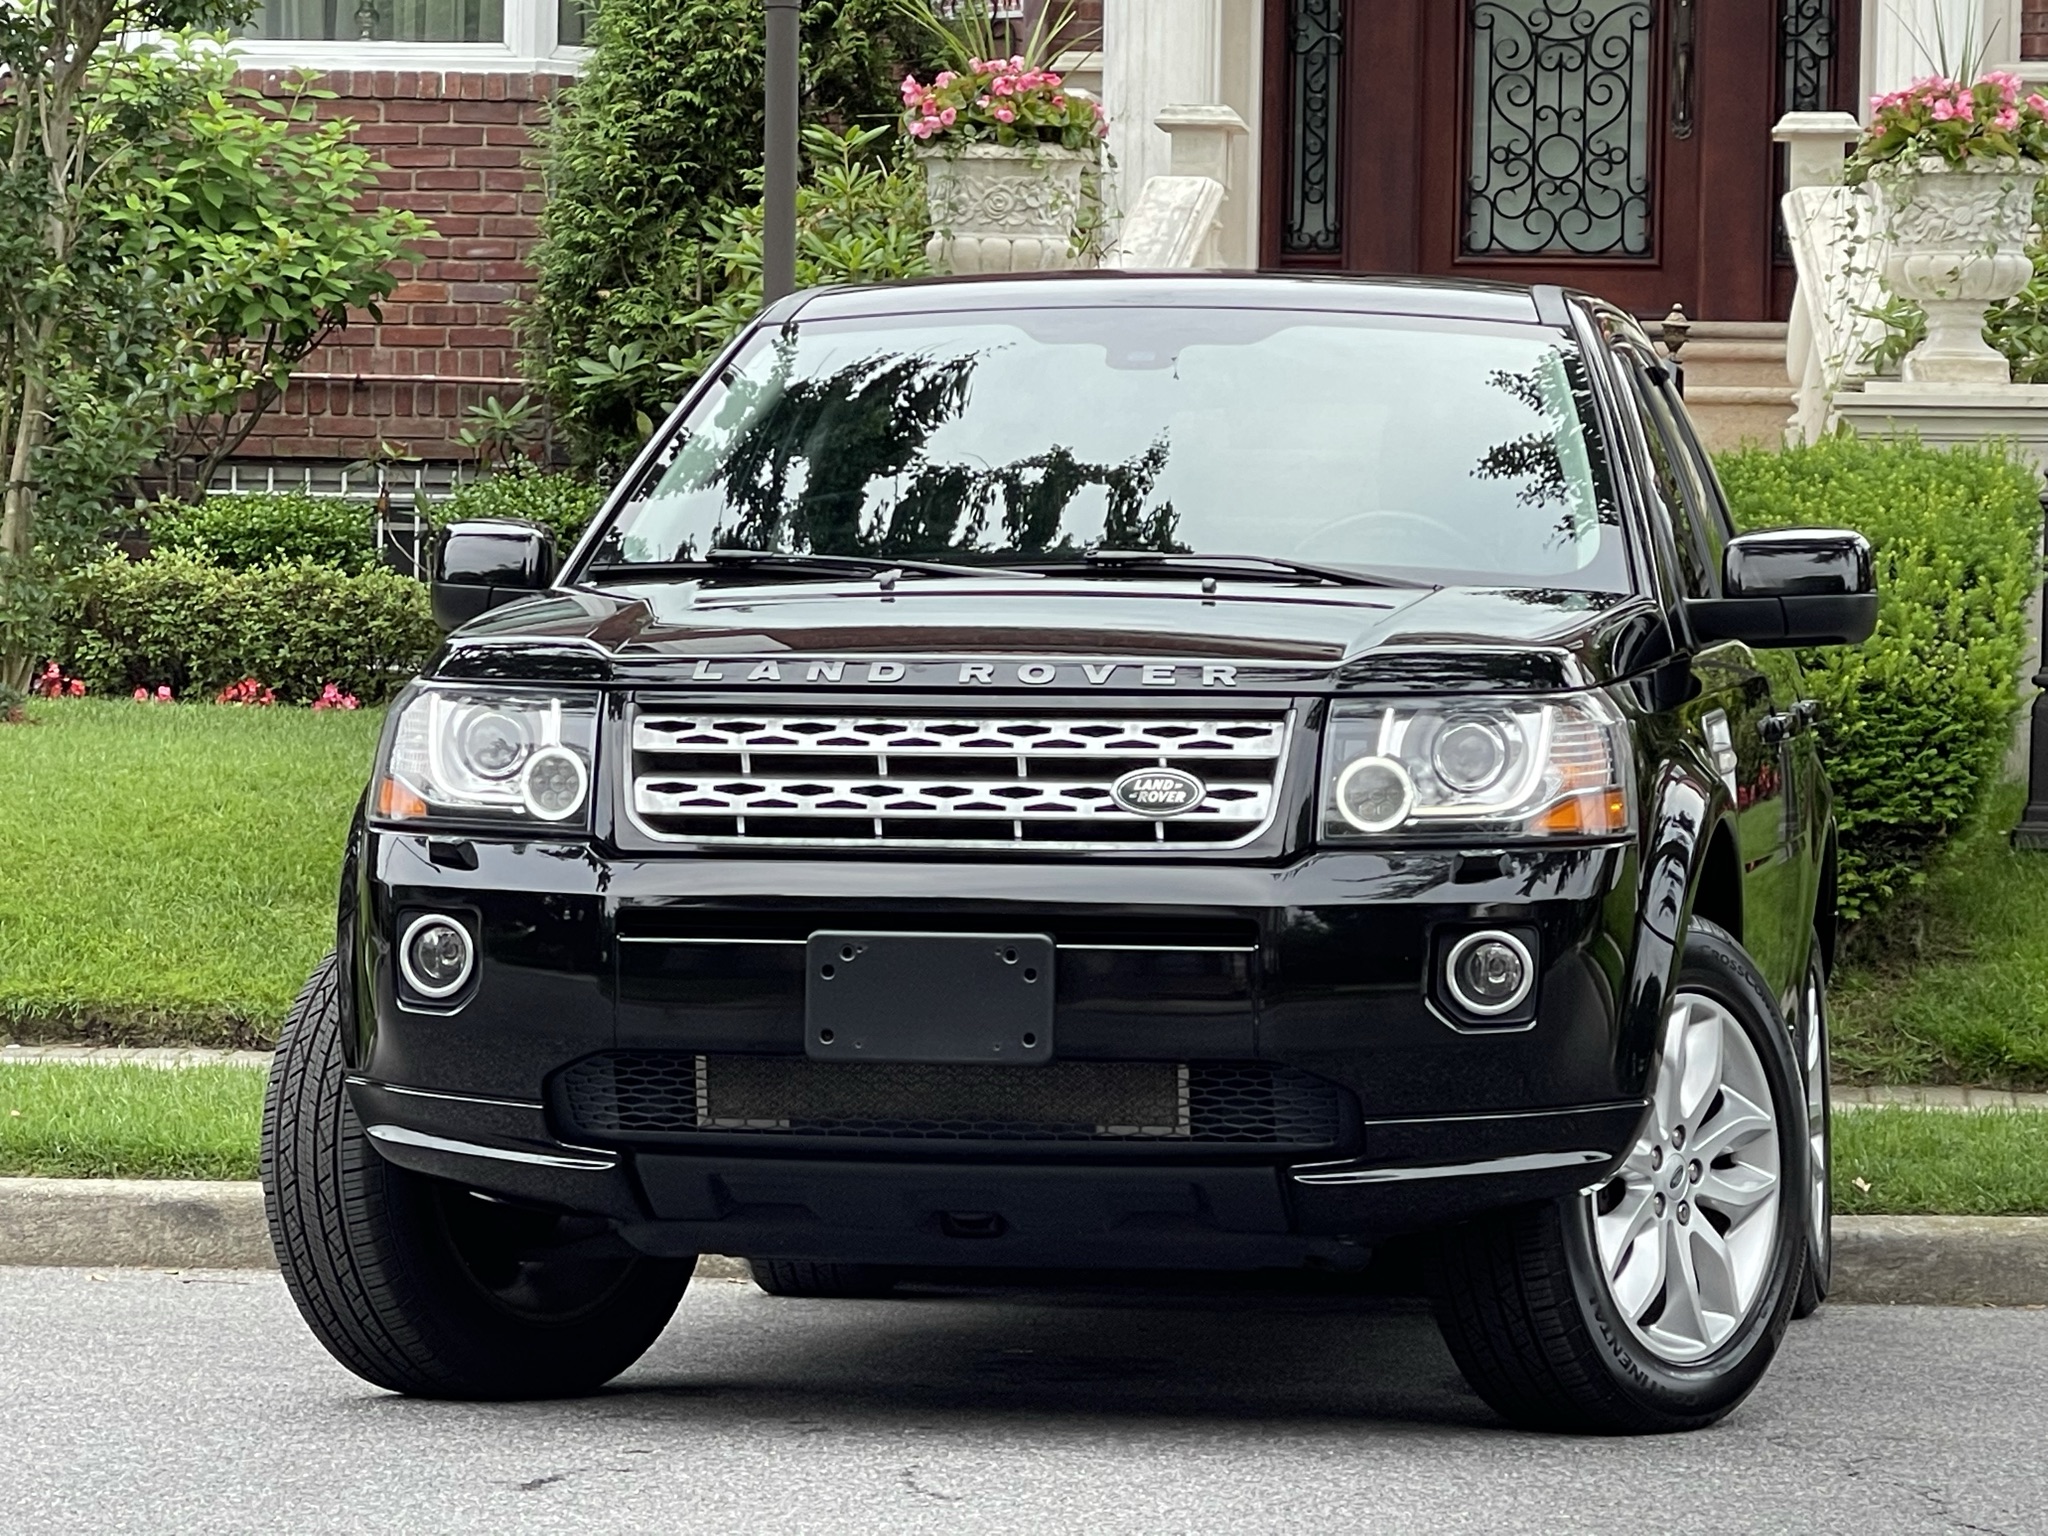 Buy Used 2014 LAND ROVER LR2 HSE for $14 900 from trusted dealer in  Brooklyn, NY!